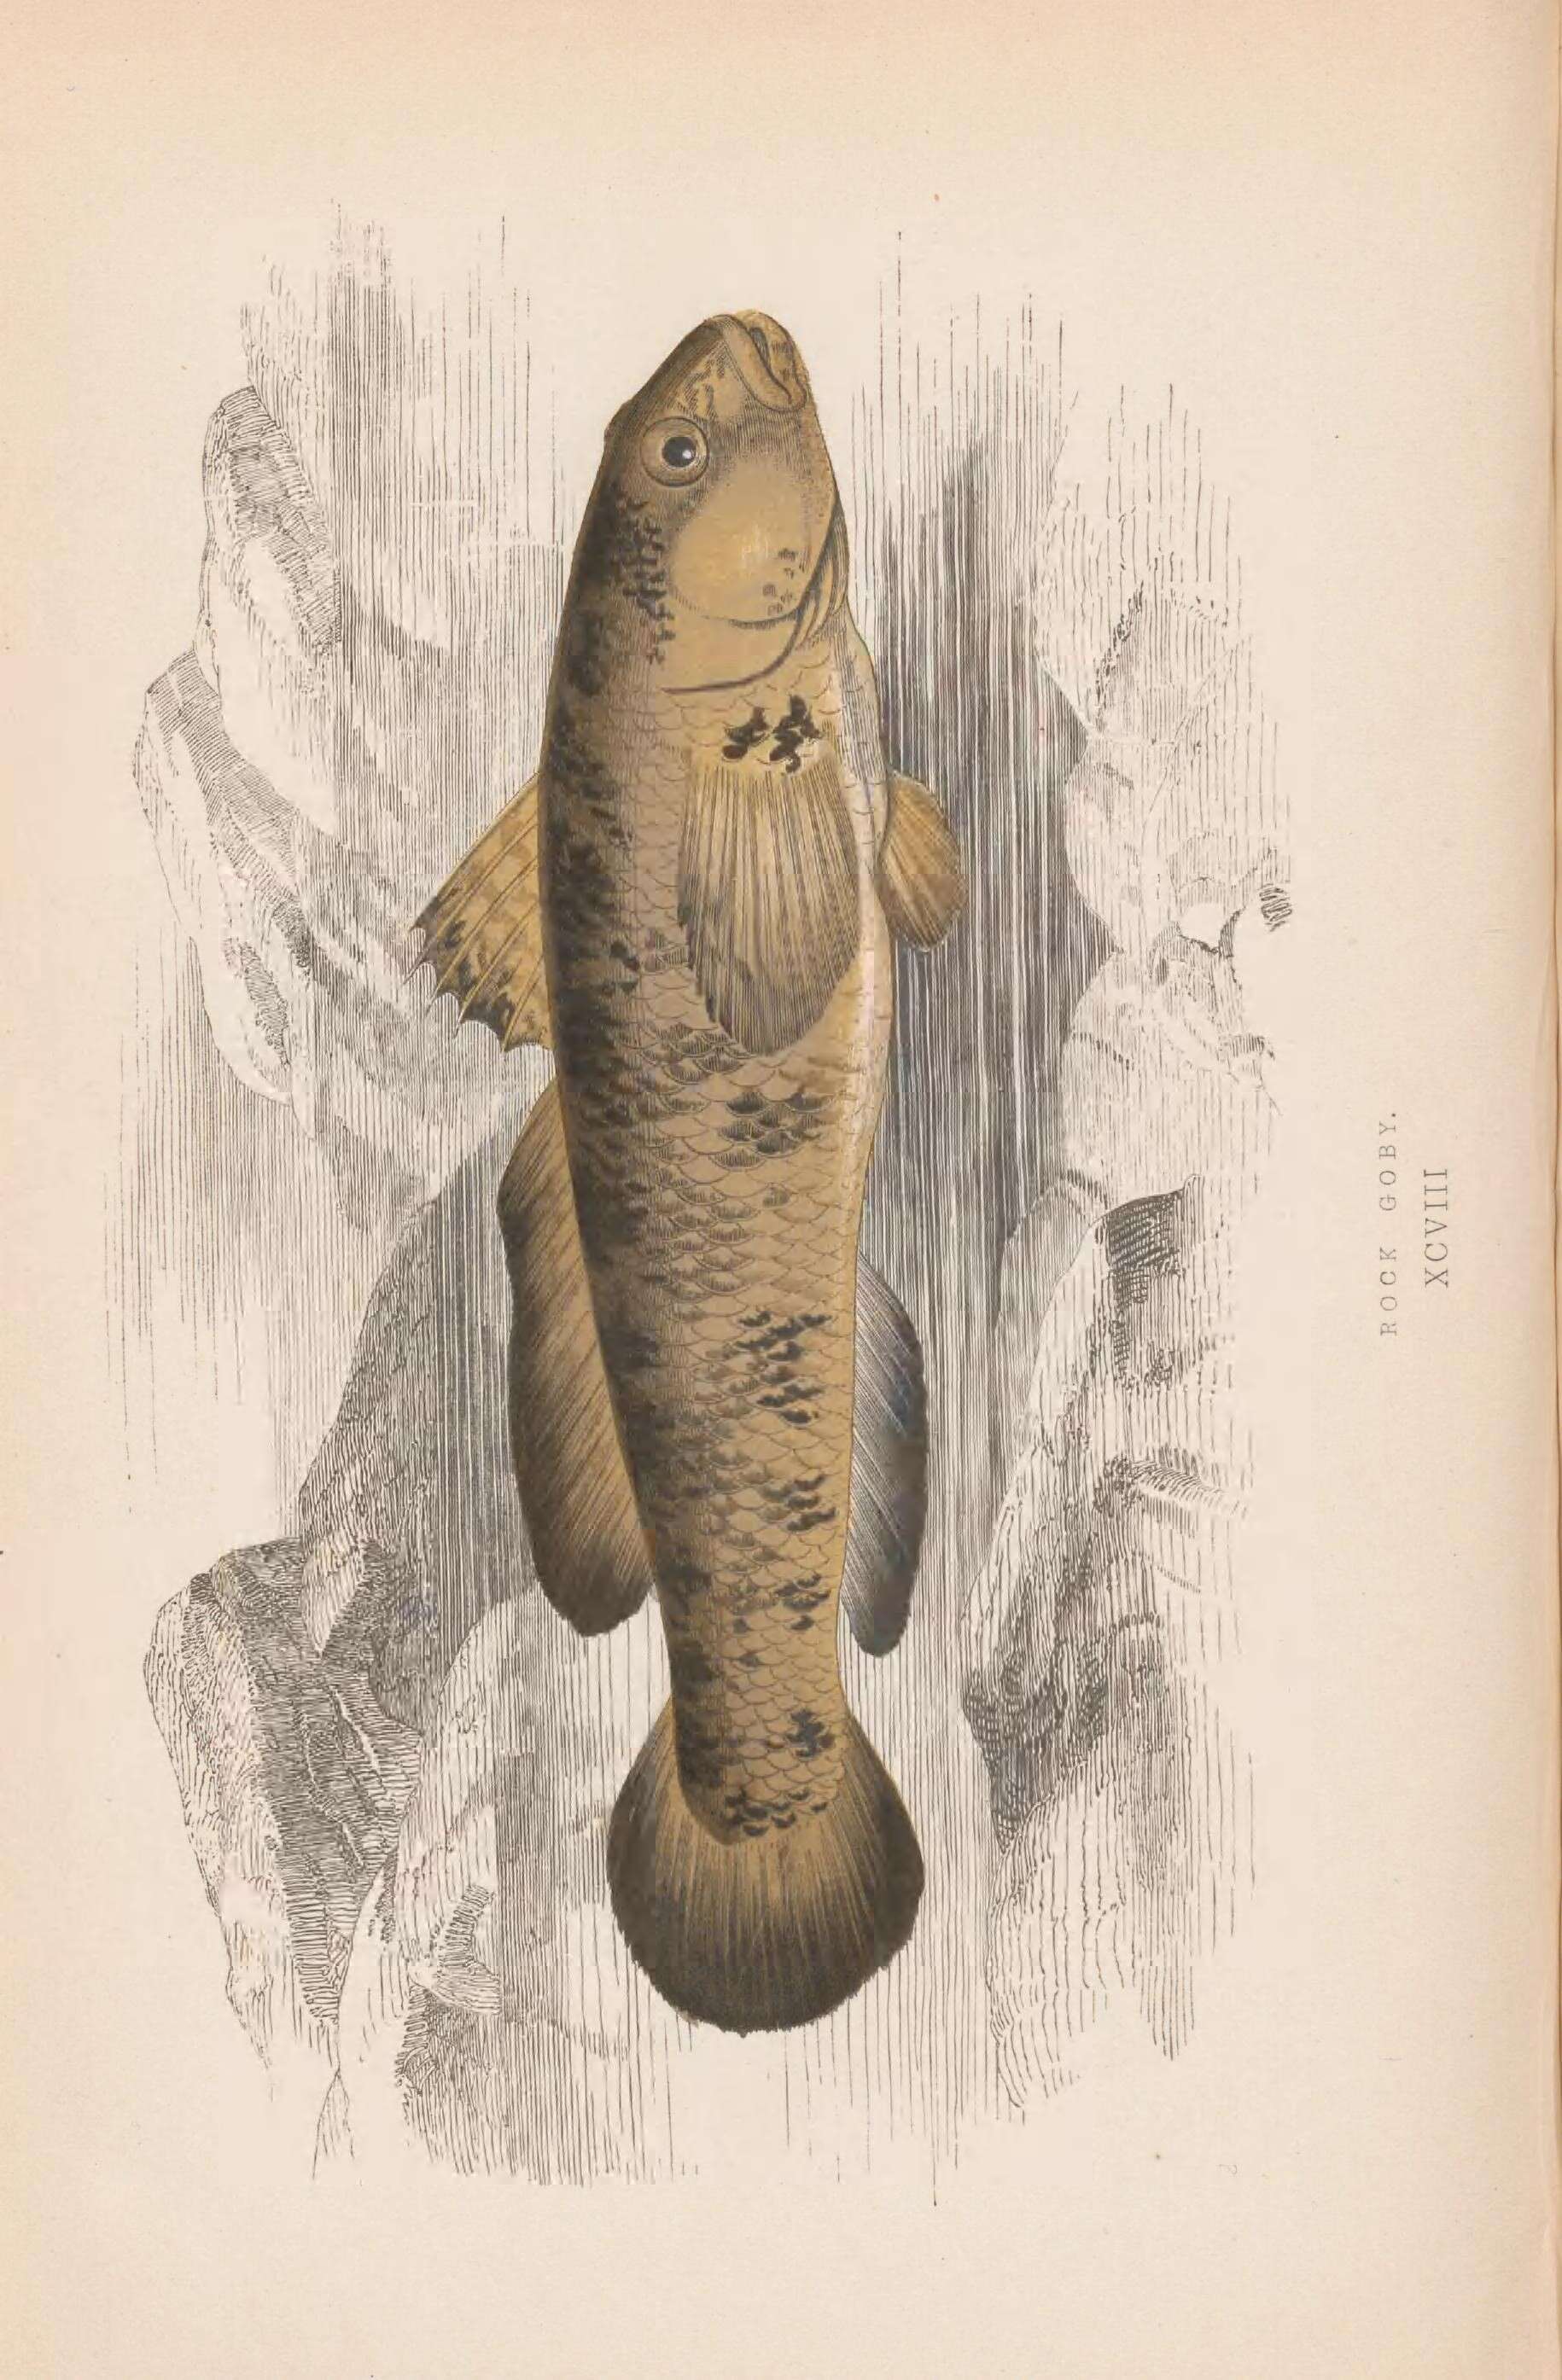 Image of Rock Goby